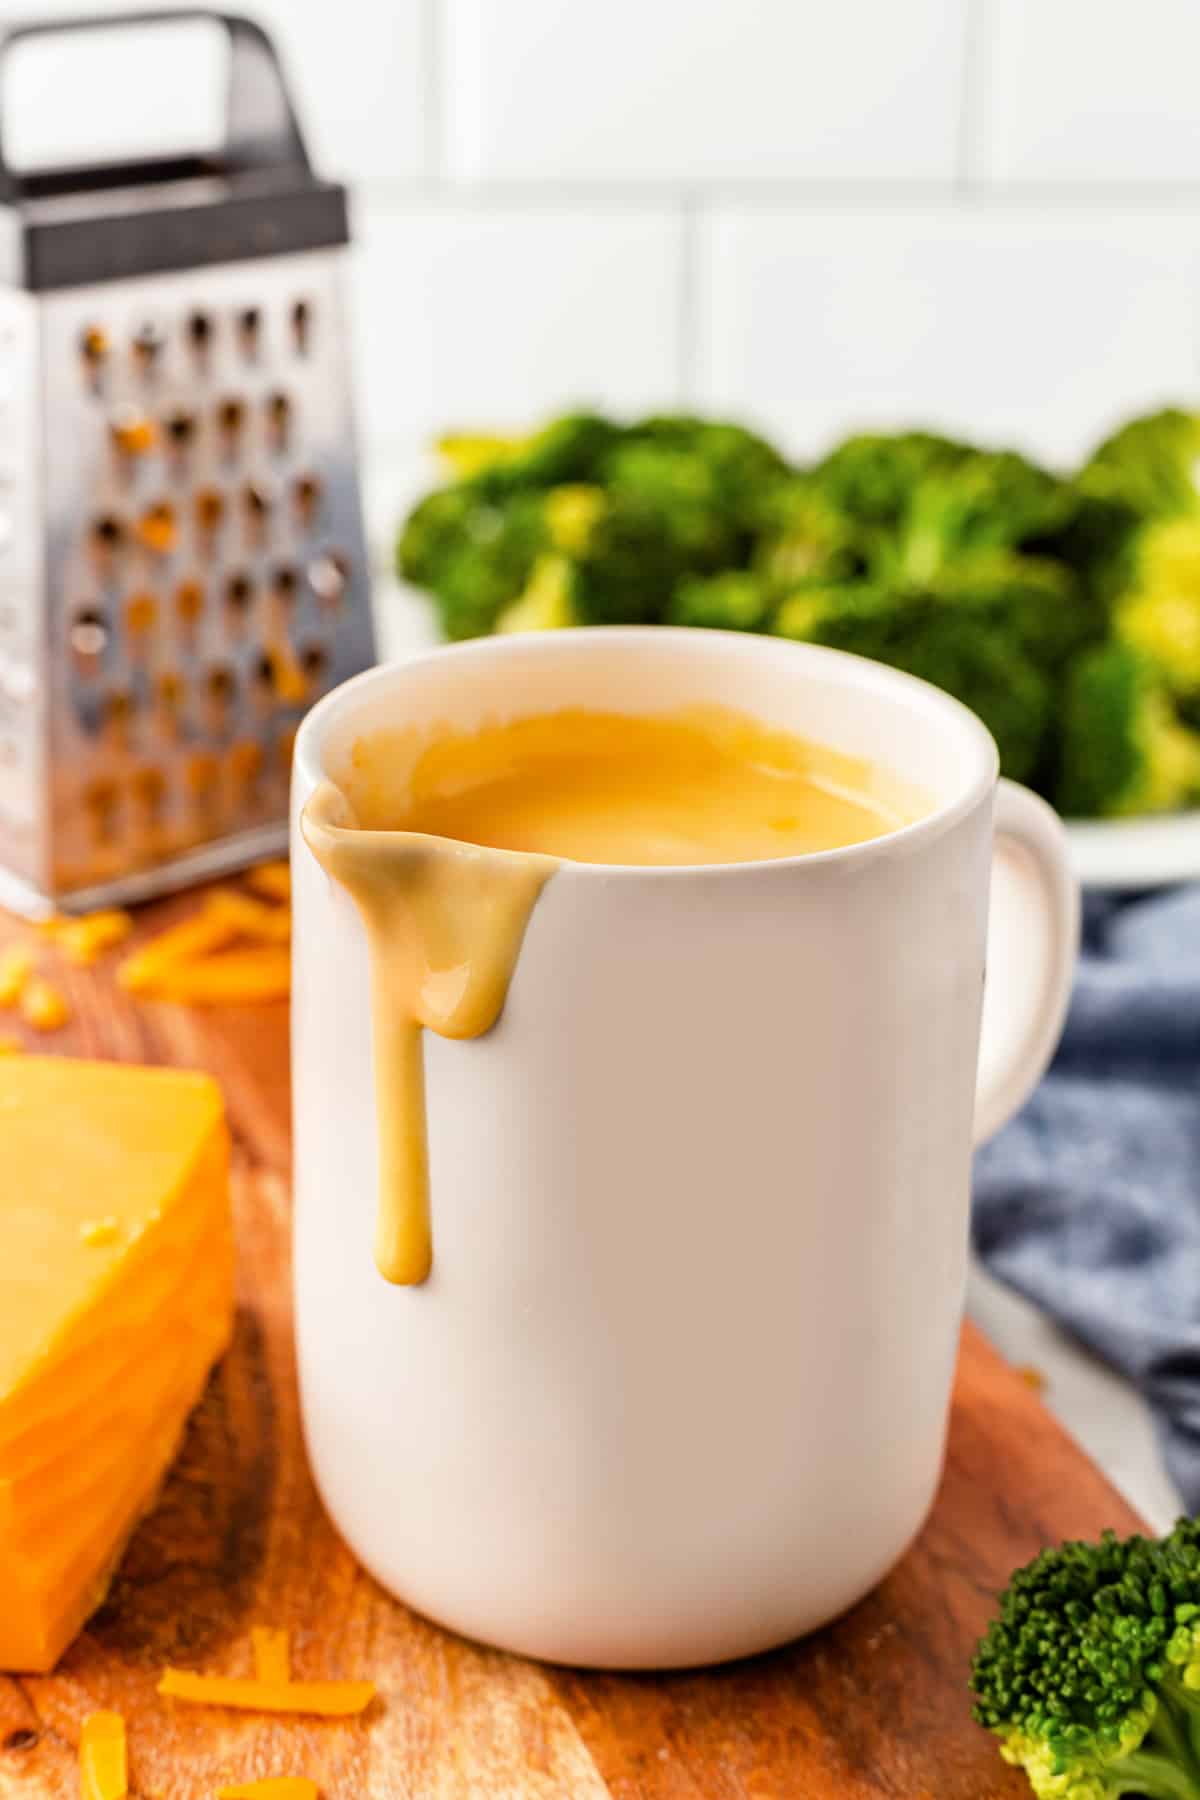 Cheese sauce in a tall white jug with drip of sauce.